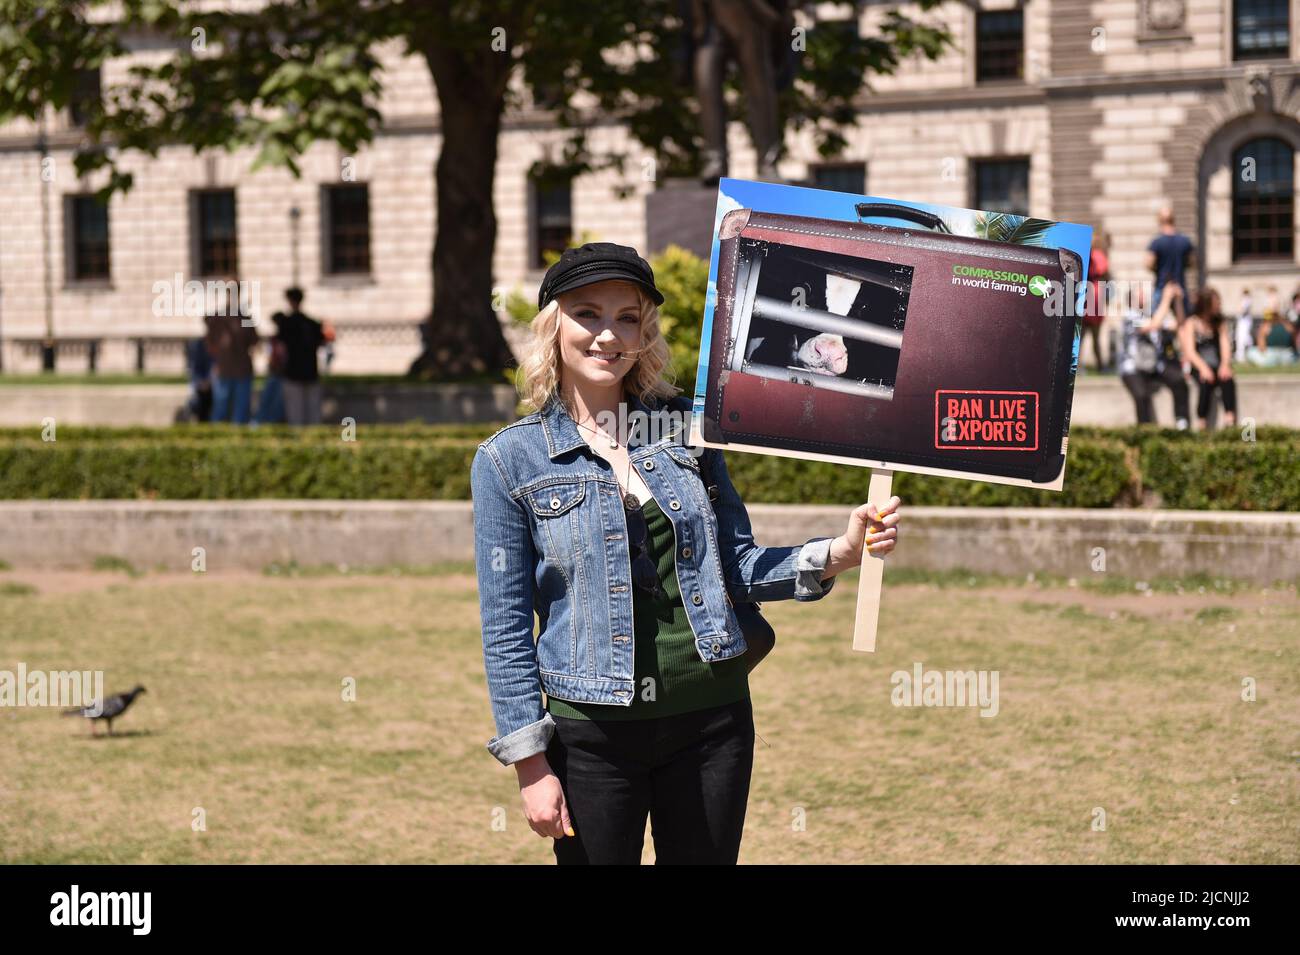 Actress and activist EVANNA LYNCH is seen at the rally. Activists staged a protest in Parliament Square to call on the UK Government to end live animal exports. Stock Photo